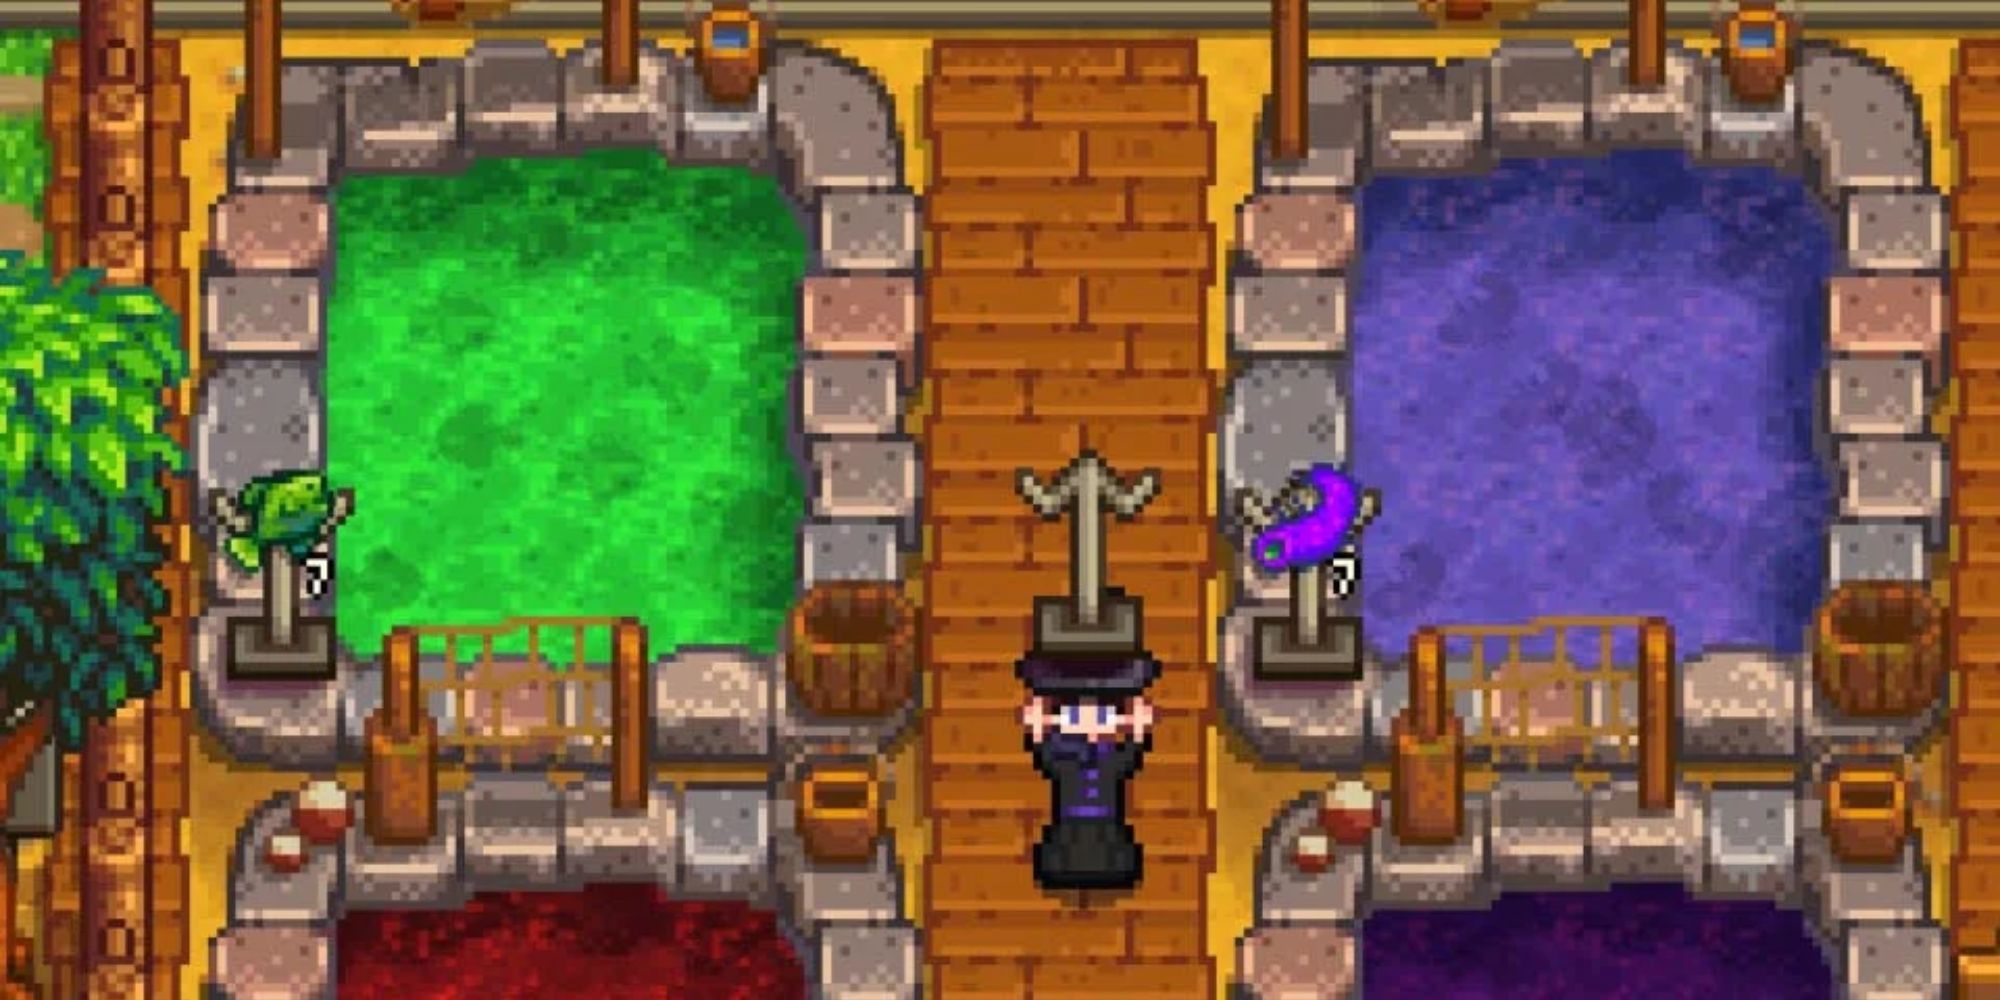 Stardew Valley Sign of the vessel with fish ponds